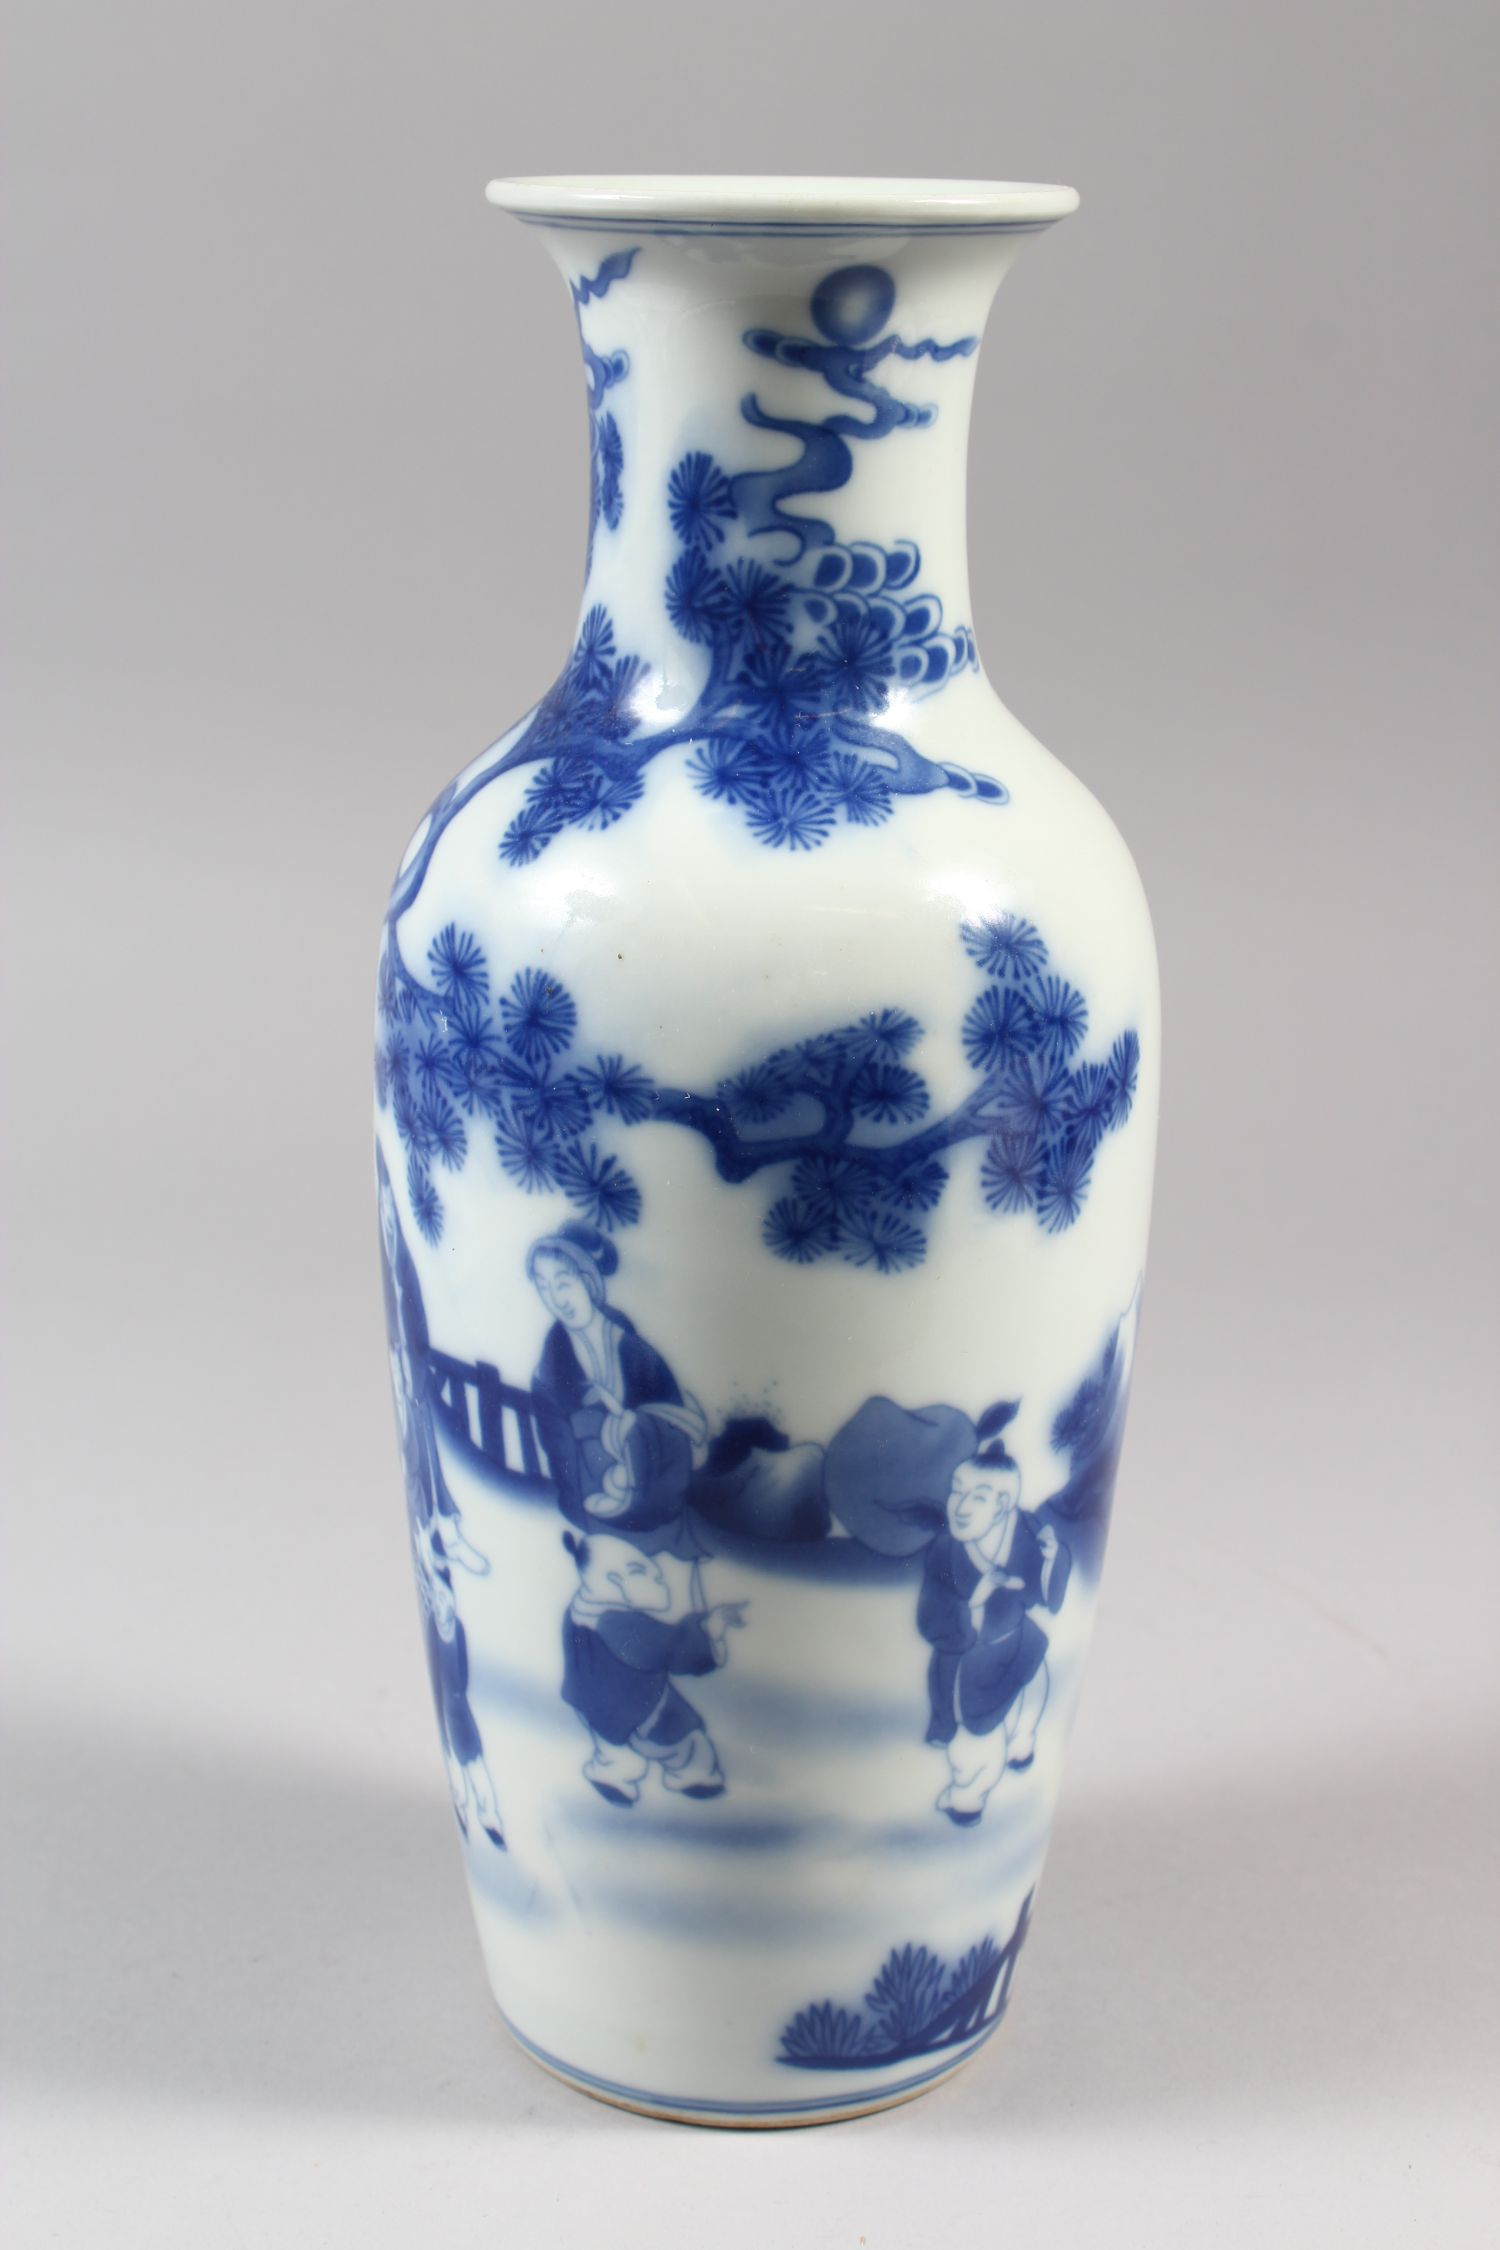 A SLENDER CHINESE BLUE AND WHITE PORCELAIN VASE, decorated with working locals surrounded by trees - Image 4 of 8